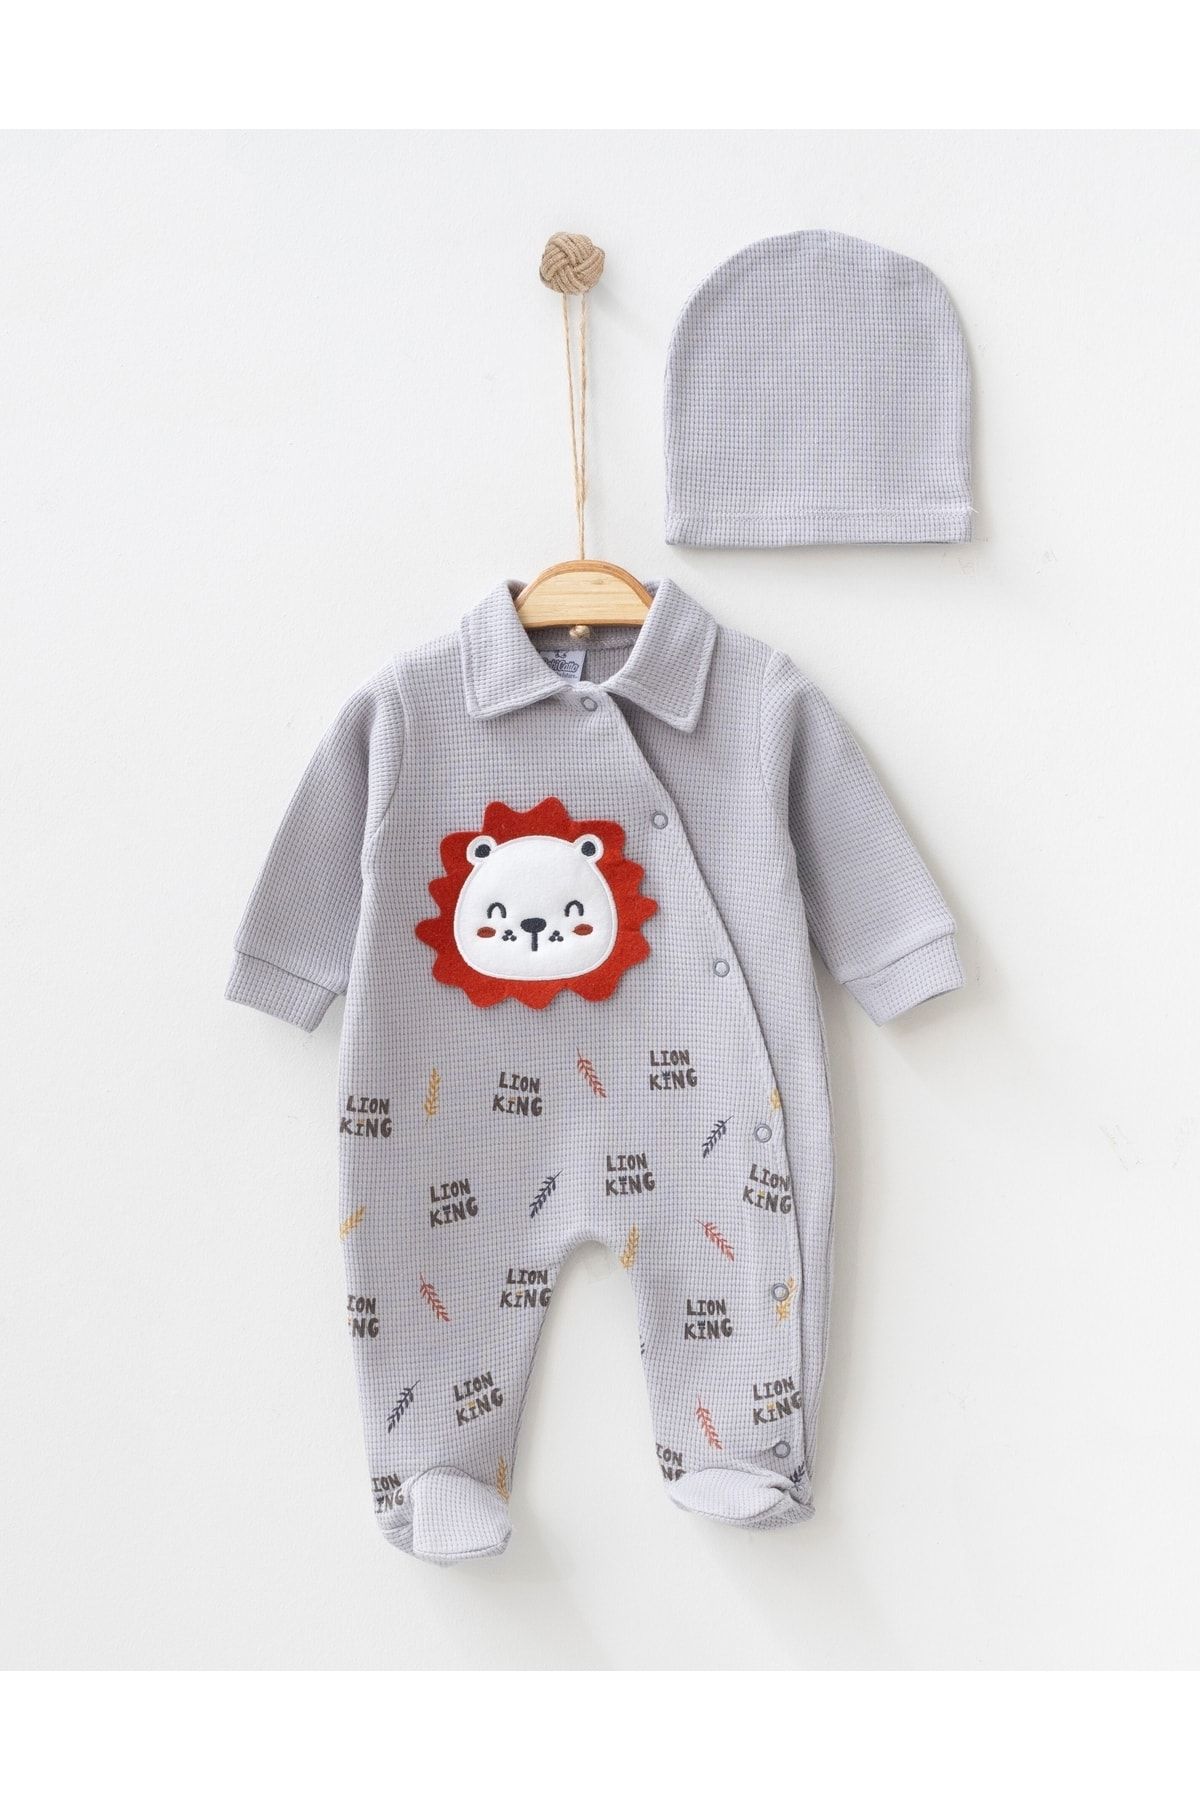 BABYLİM Lion Embroidered Lion King Printed Baby Boy Hat Gray Rompers ...